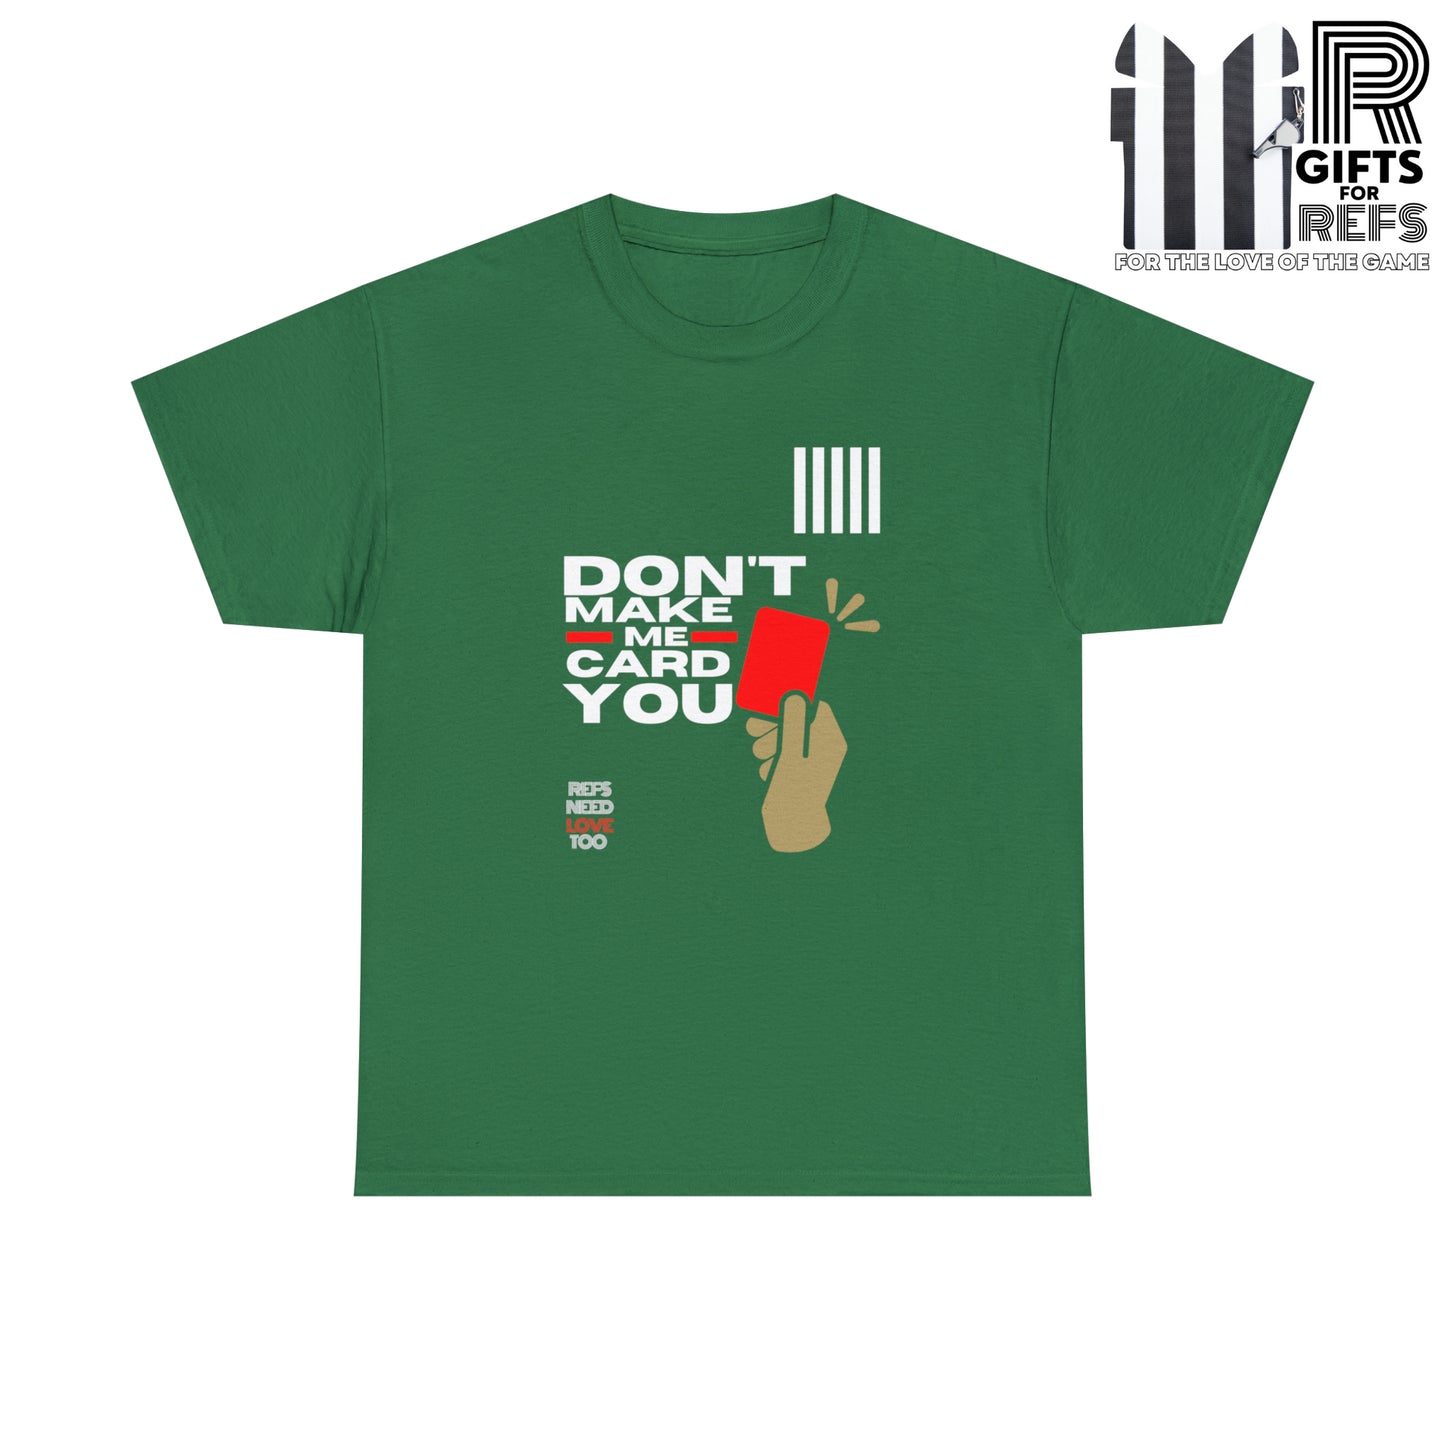 Don't Make Me Card You Cotton Tee | Gift For Soccer Refs | Screen printed t shirt| Funny Red card shirt | Referee gifts | Refs Need Love Too